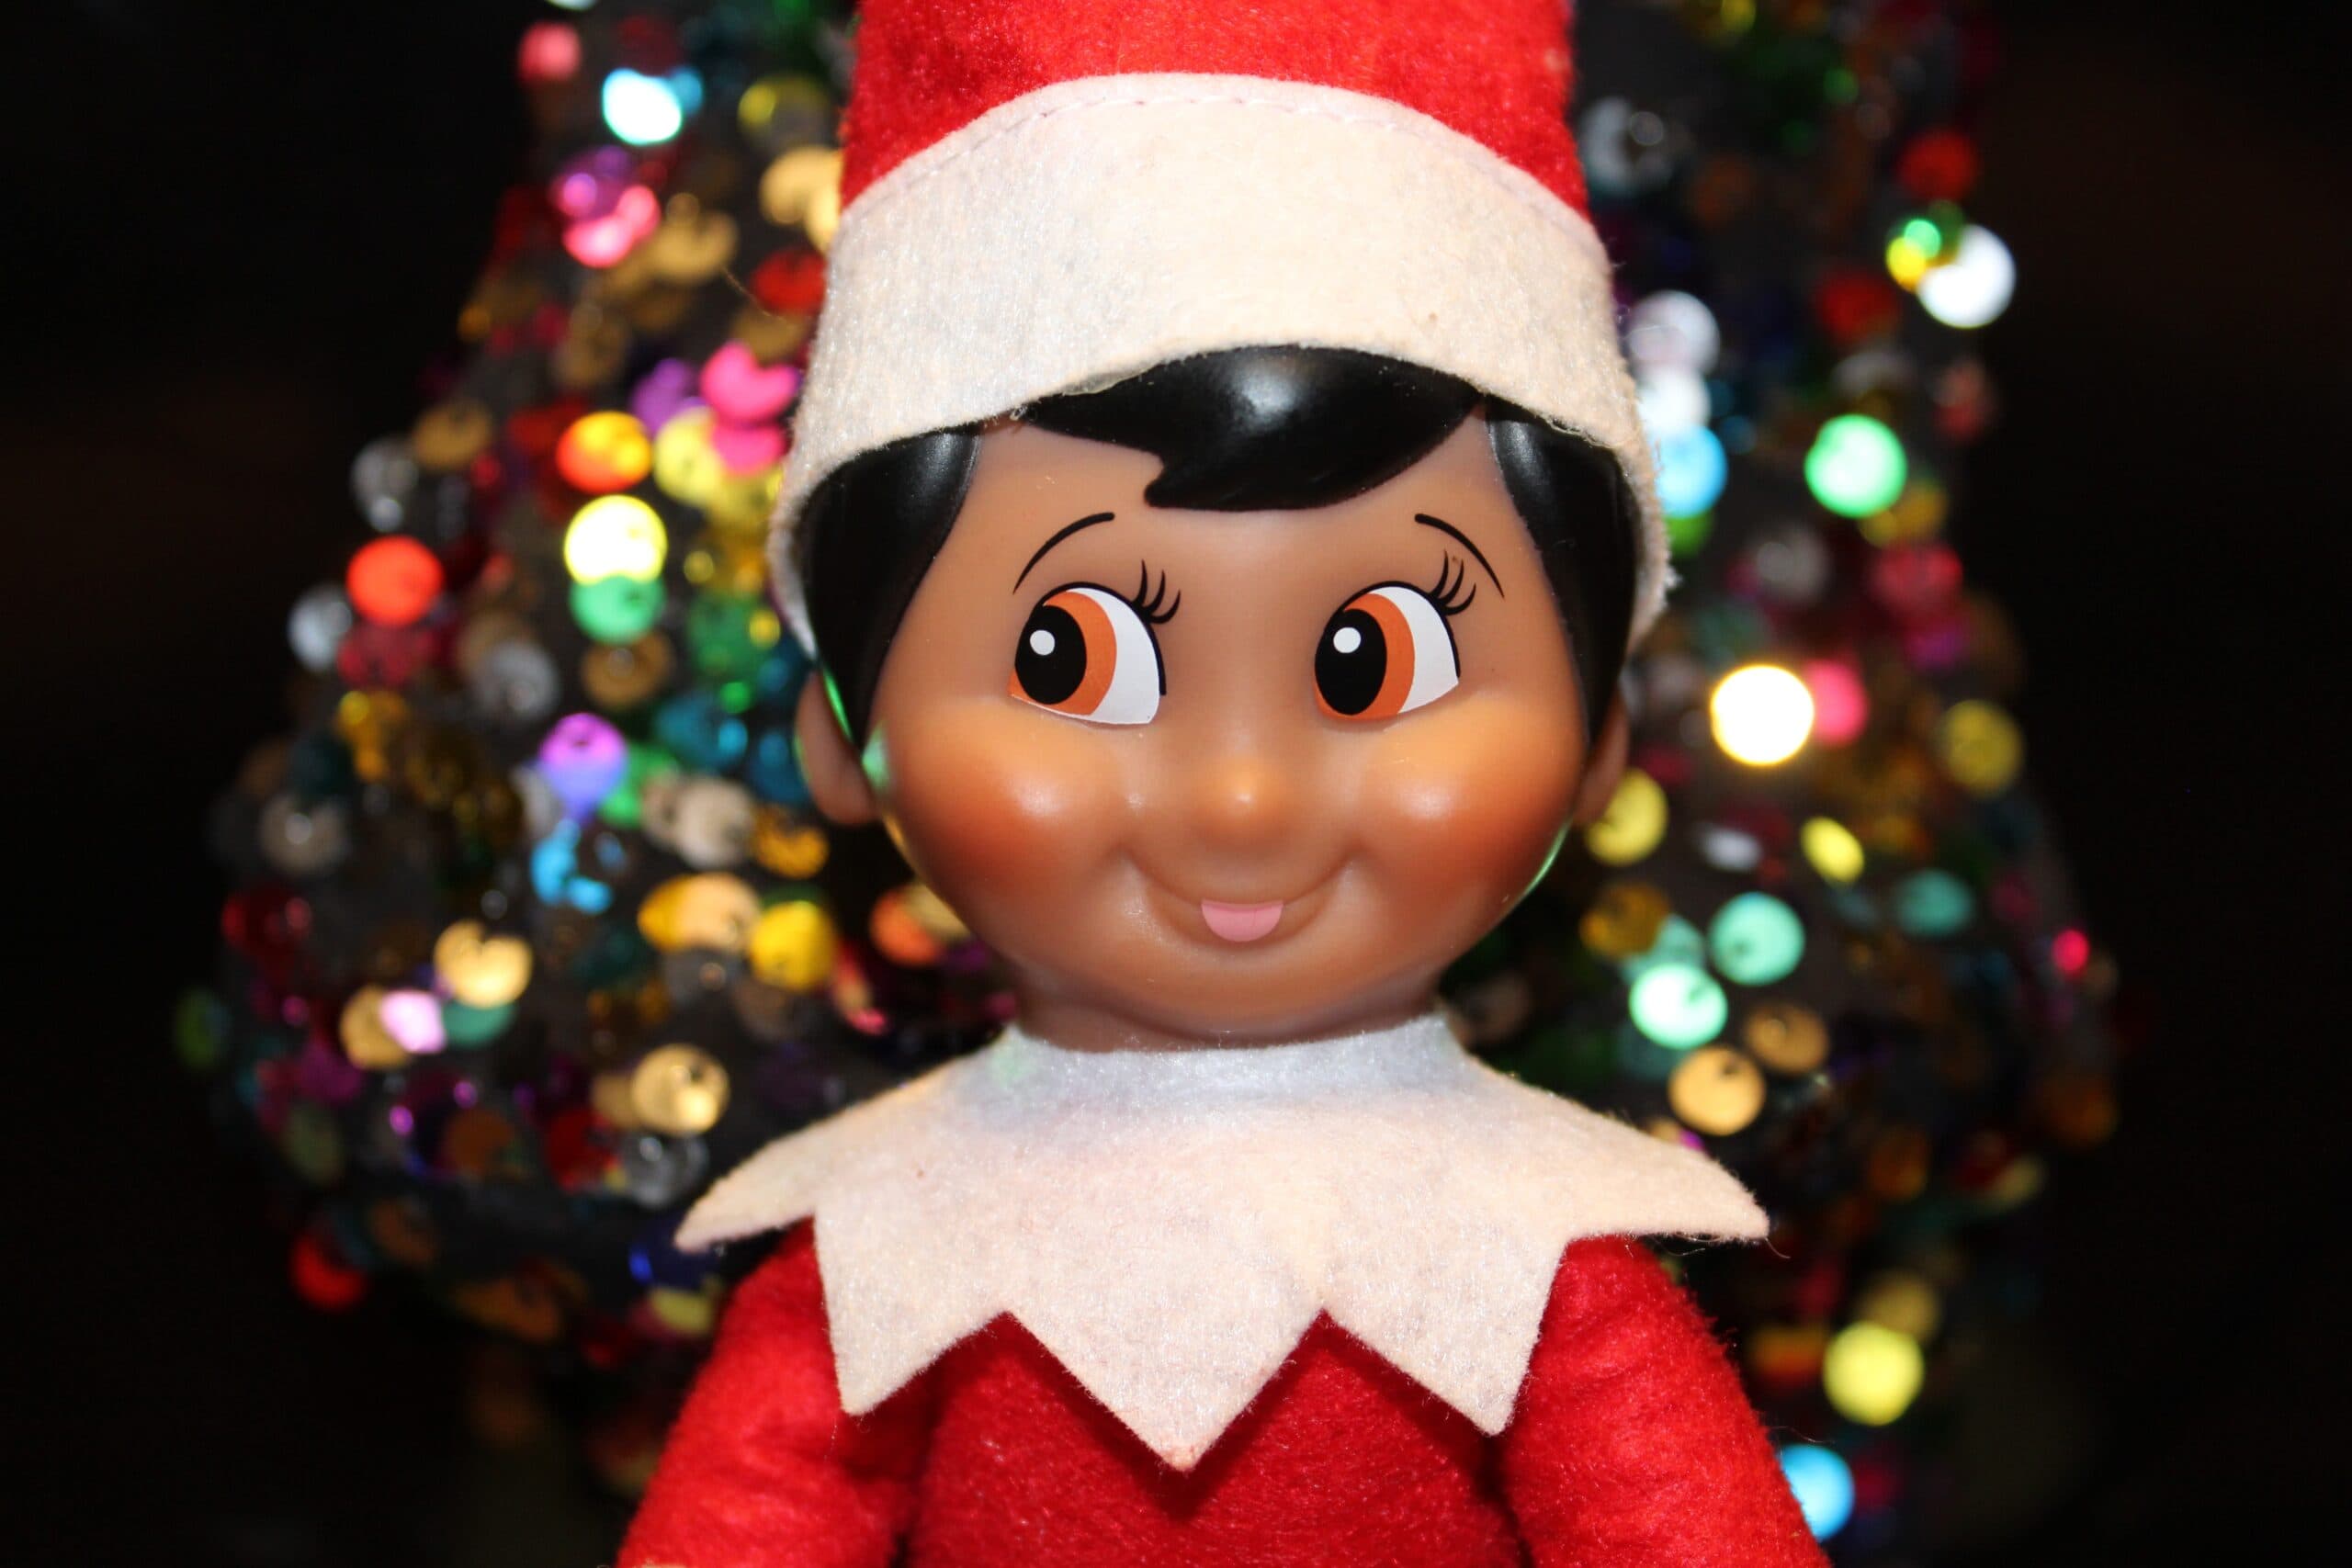 The Case of the Missing Elf on the Shelf